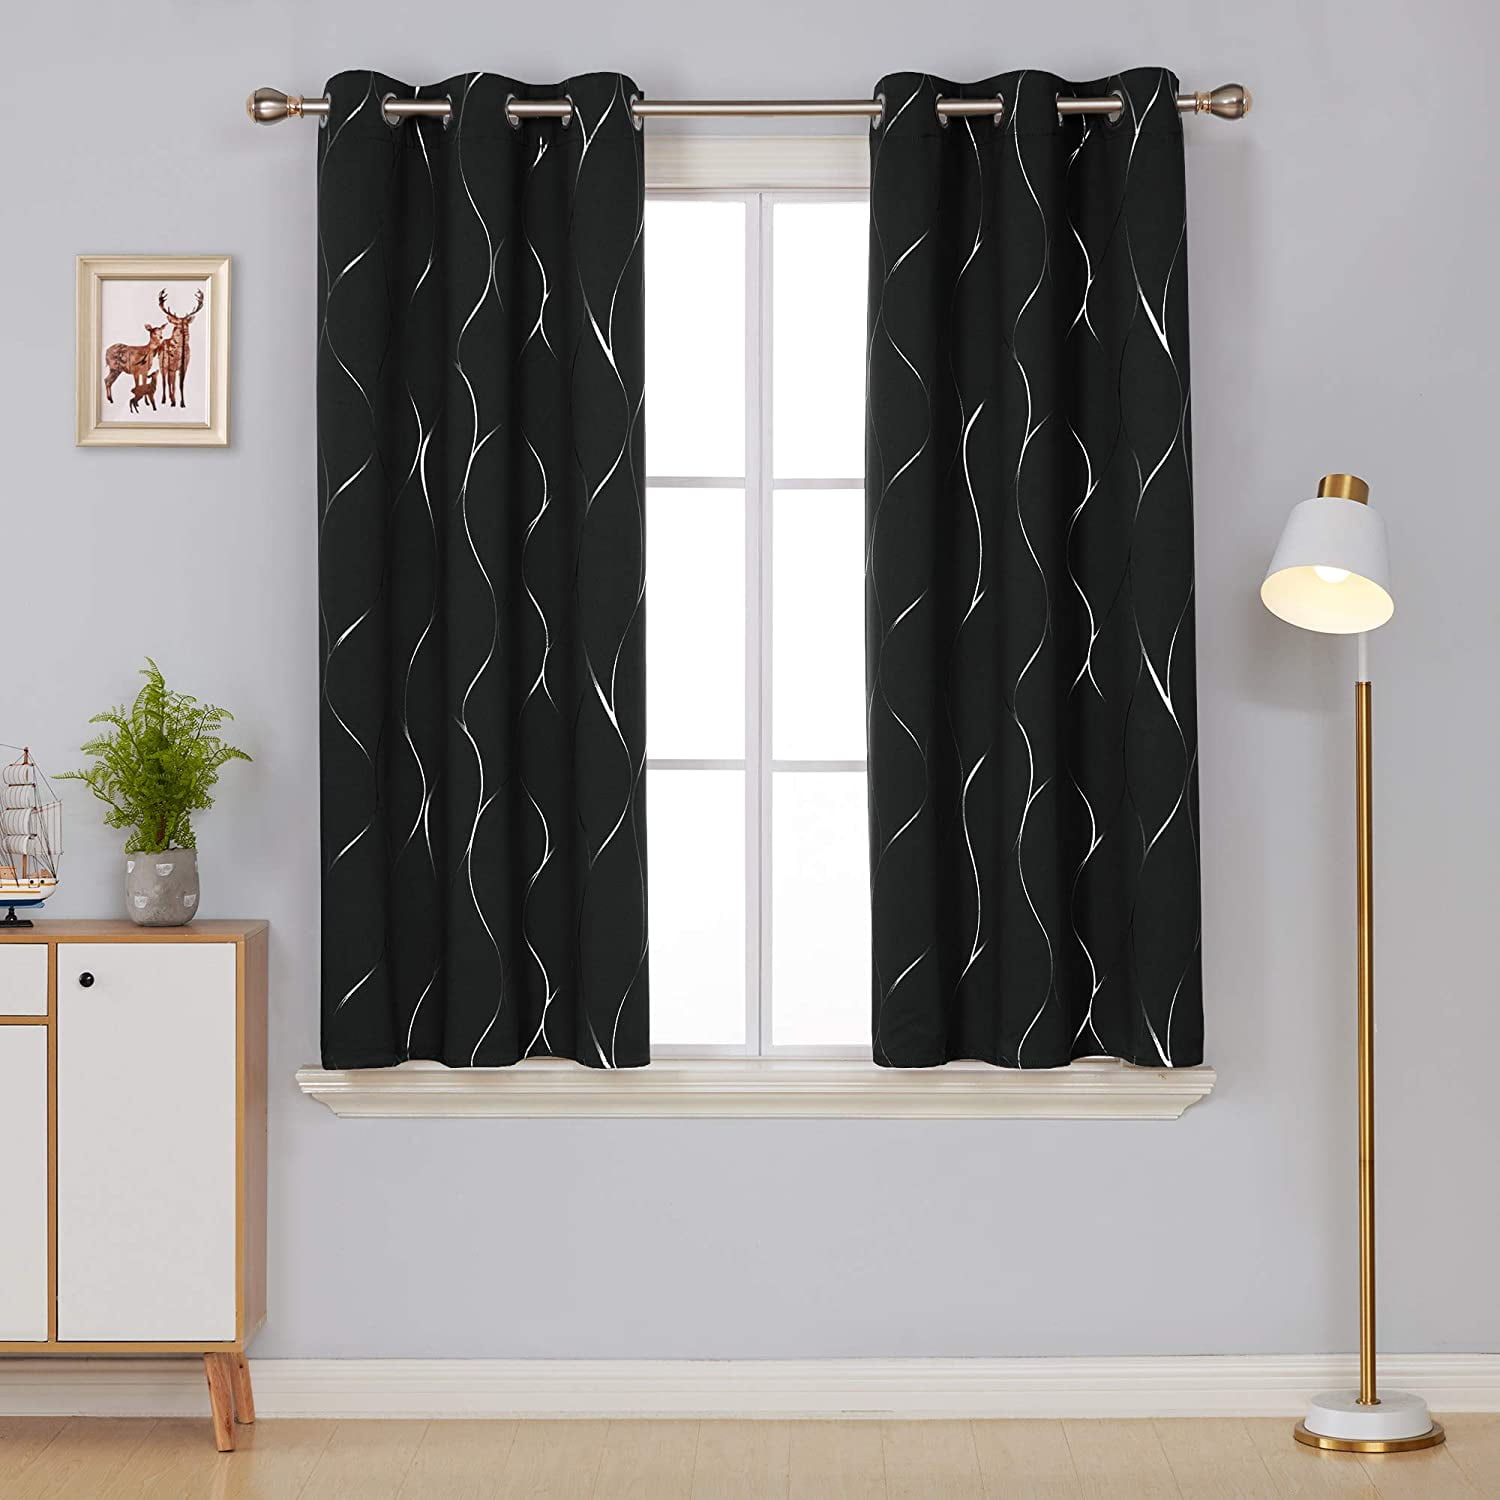 WYE Room Darkening Thermal Insulating Semi-Blackout Window Curtains for Living Room Eyelet Trees Birds Pattern Draperies and Curtains Grommet Drapes for Sliding Glass Door 1 Panel 42W x 63L Inch